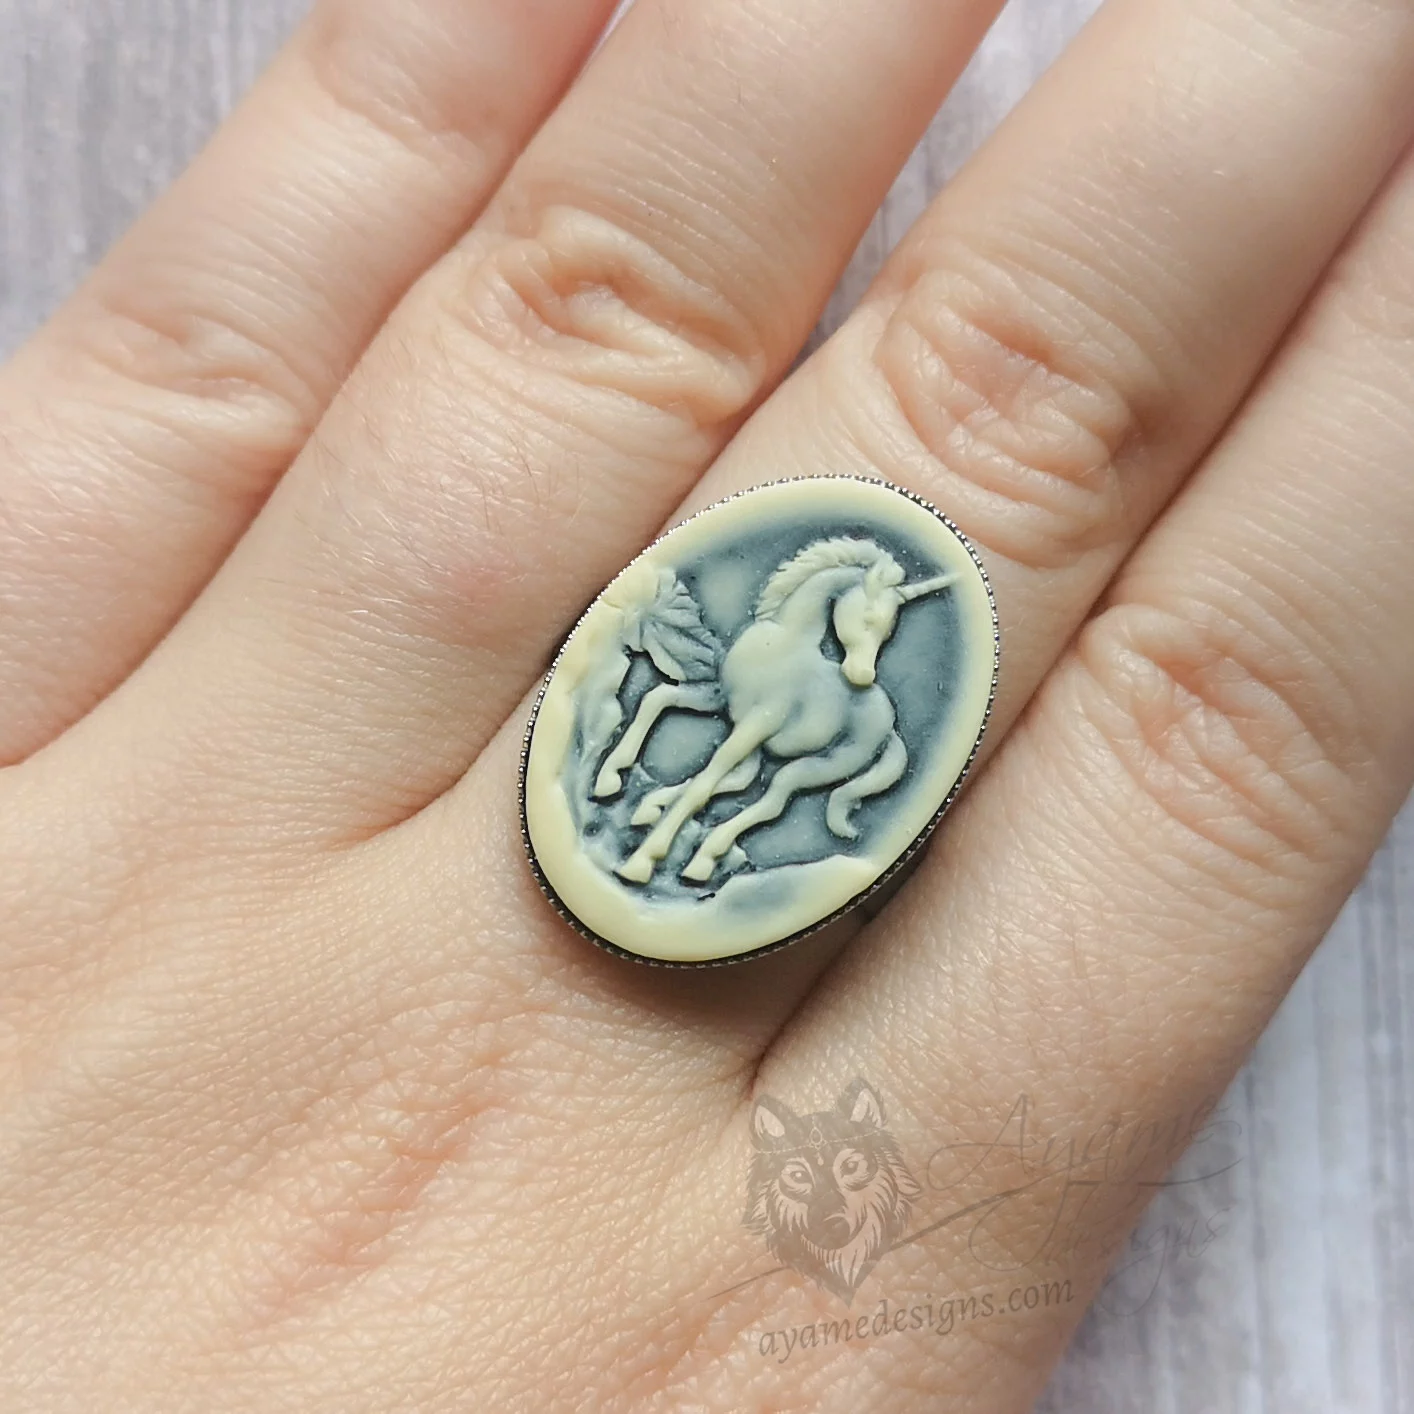 Adjustable stainless steel ring with resin unicorn cameo